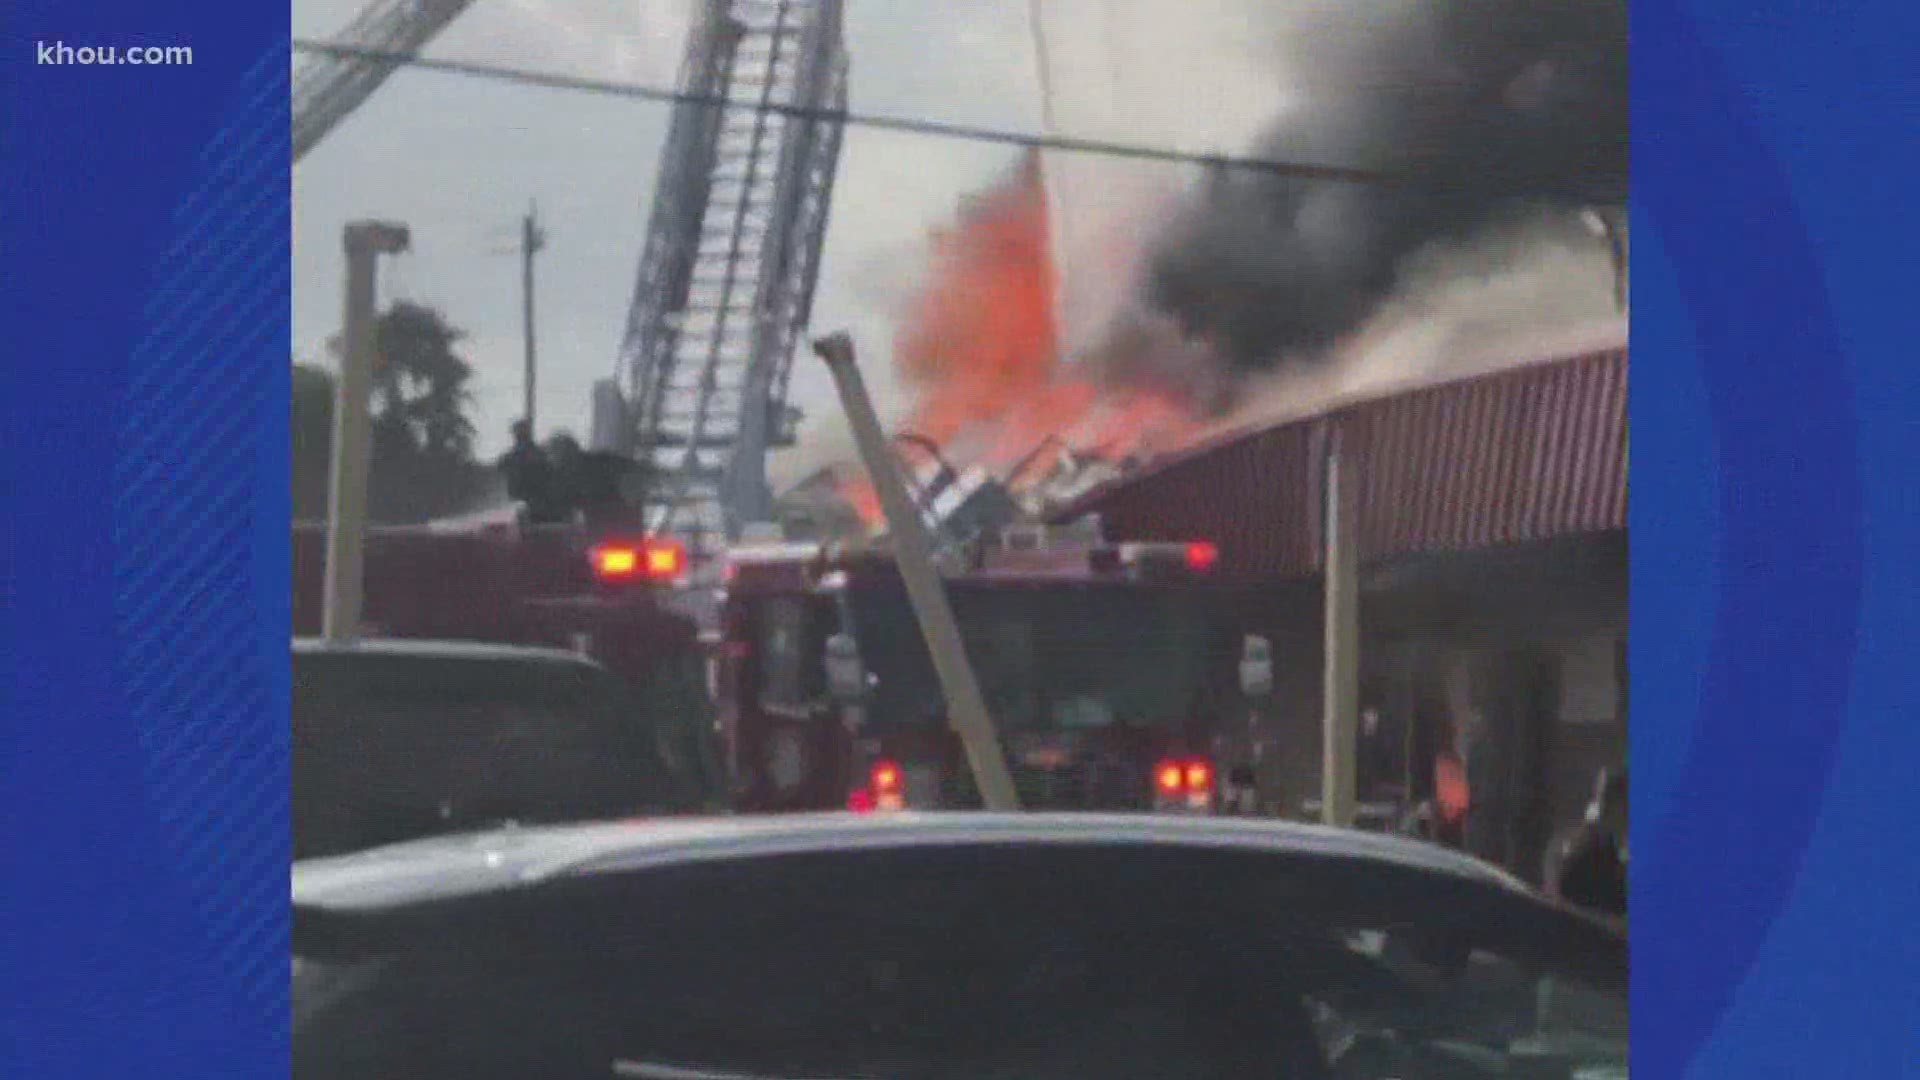 Houston firefighters battled a building fire a supermarket in southeast Houston Friday evening.